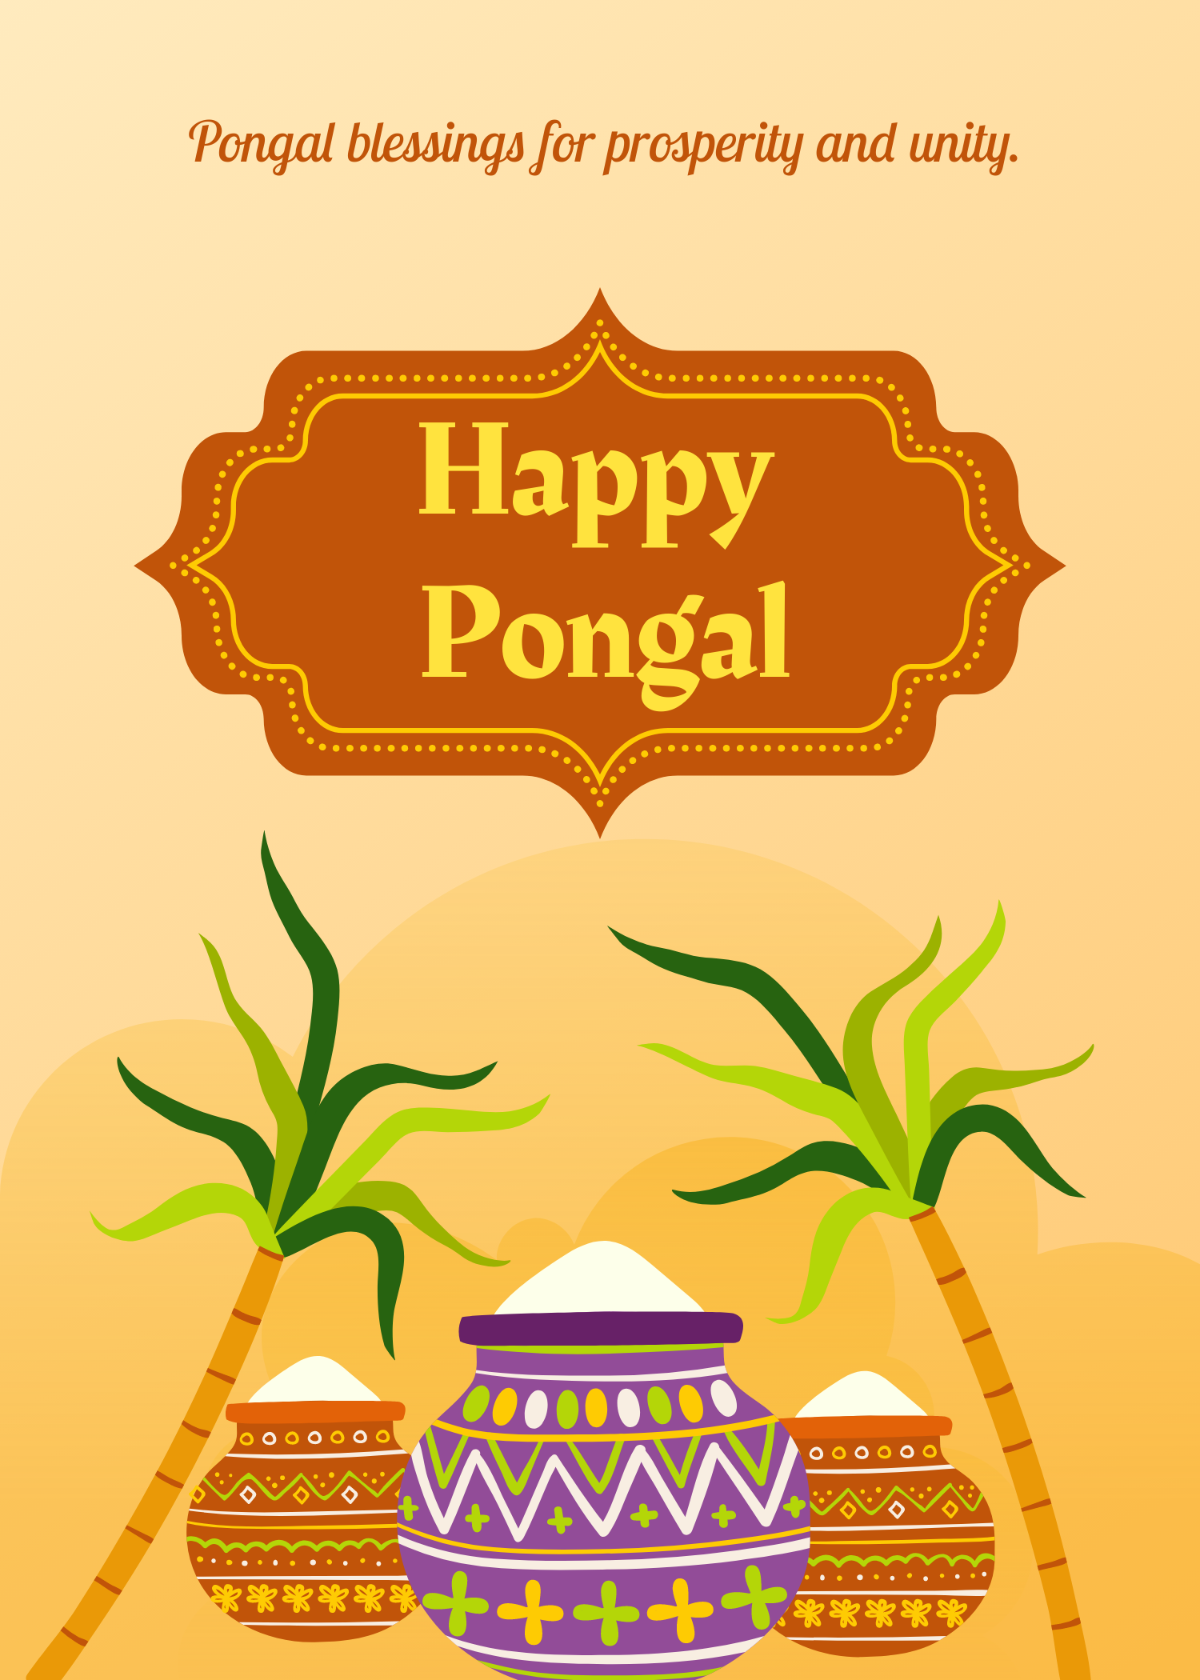 Old Pongal Greetings Cards Template